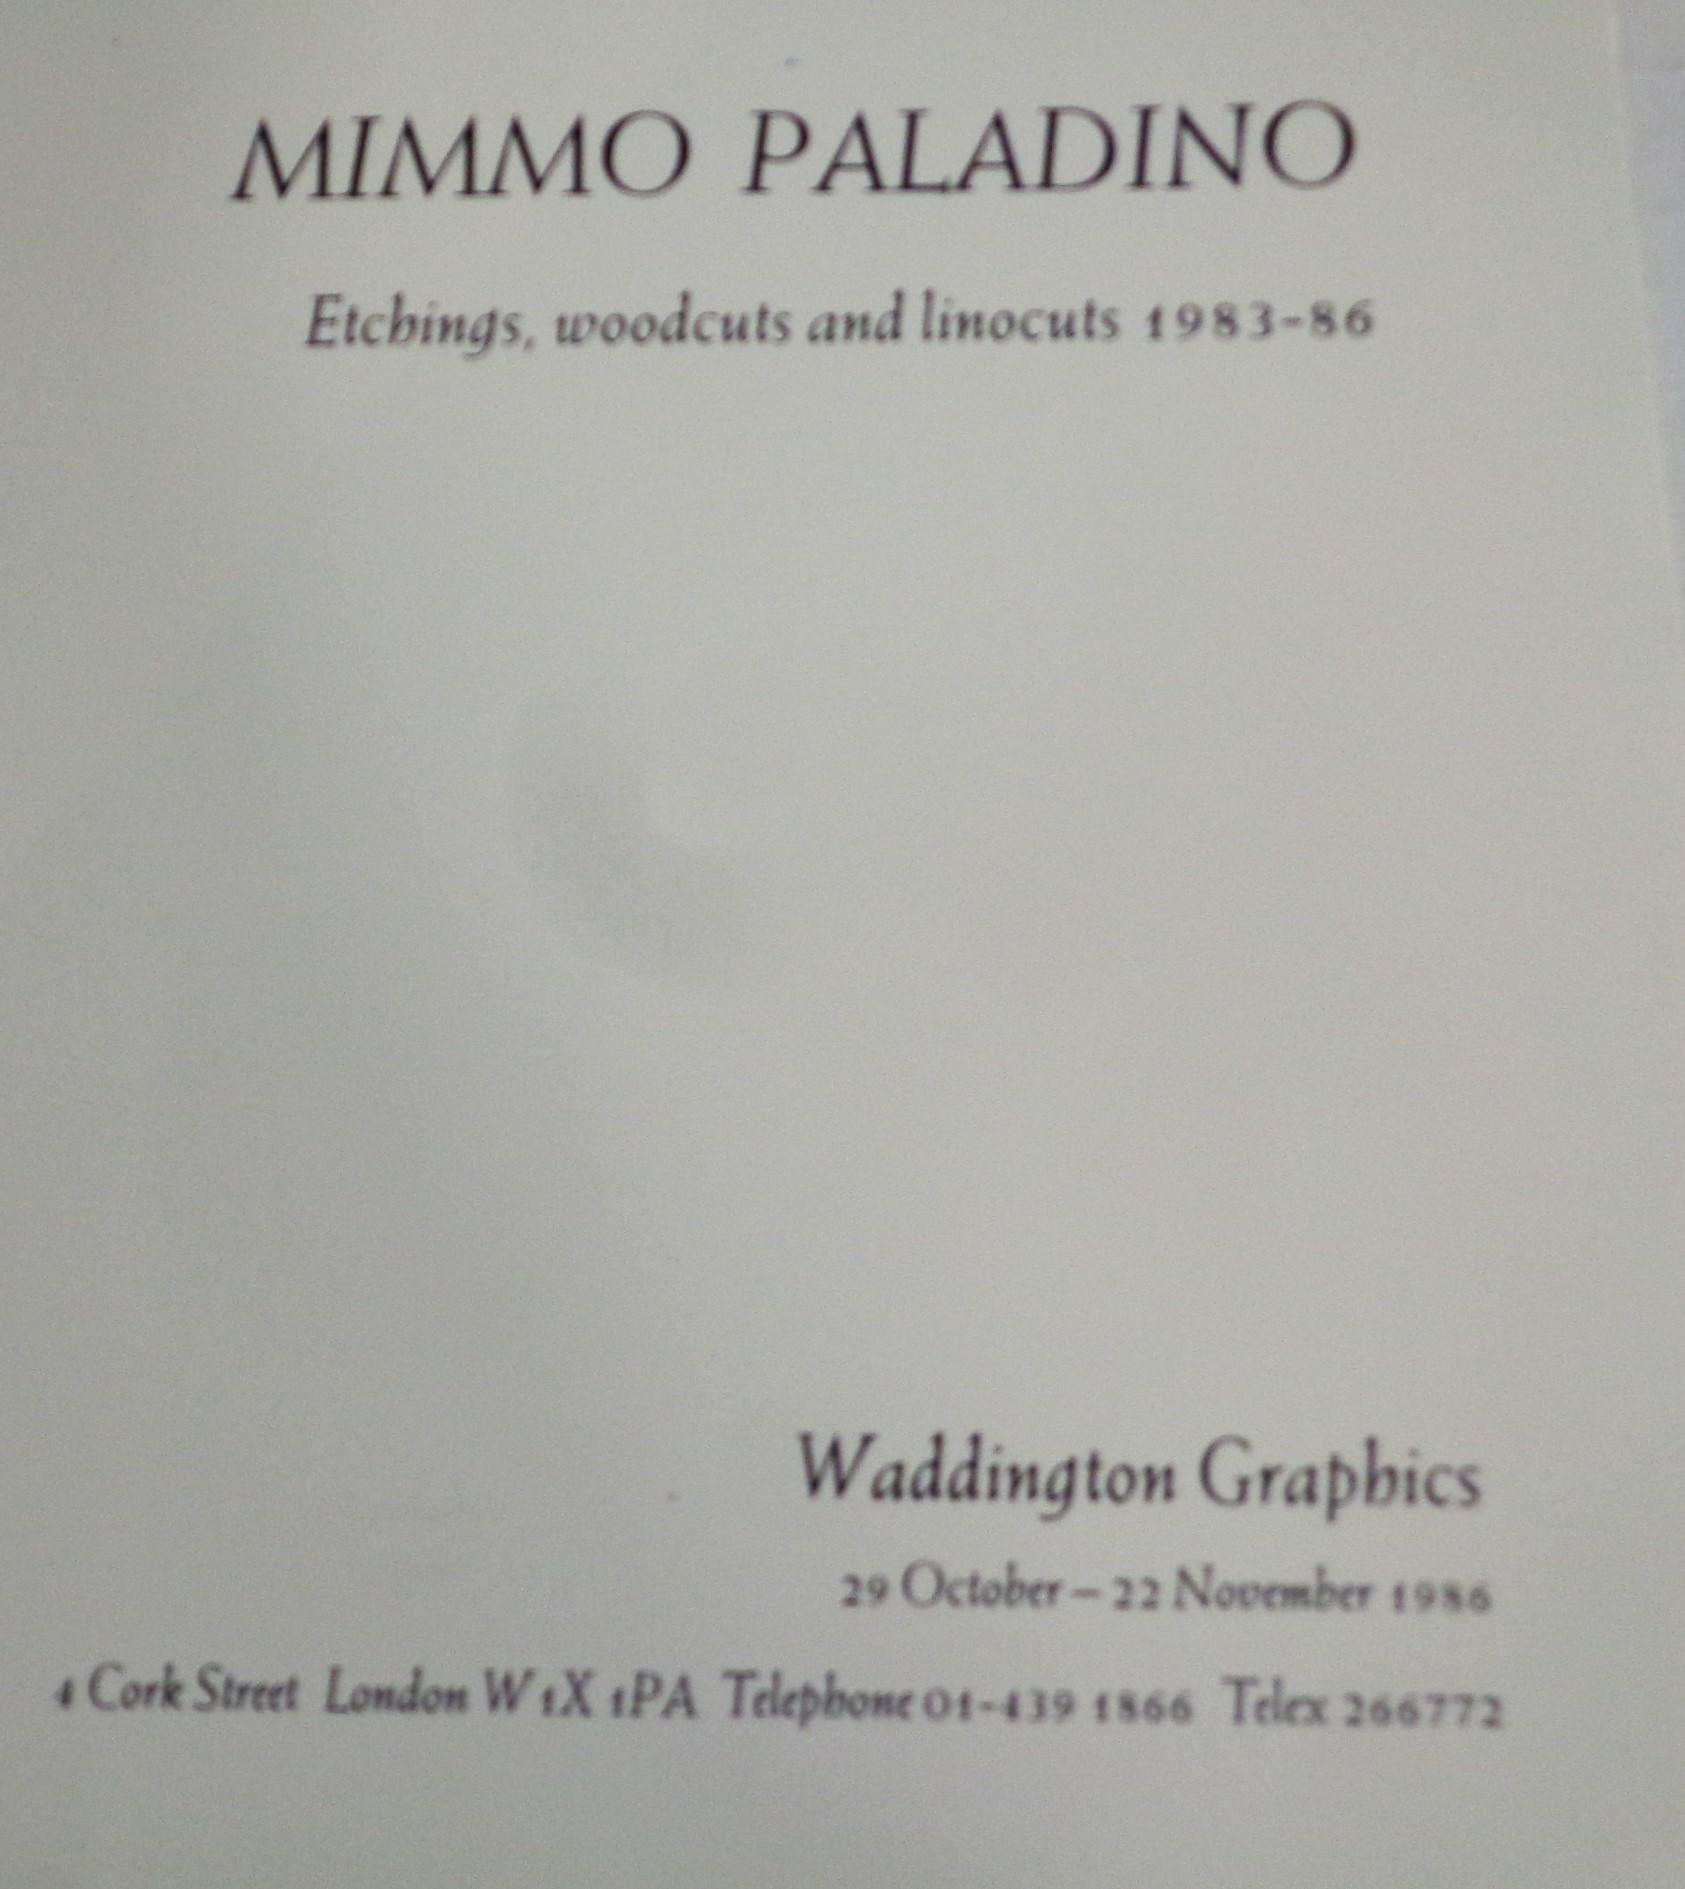 English MIMMO PALADINO Etchings Woodcuts and Linocuts 1983 - 1986 - Exhibition Catalogue For Sale